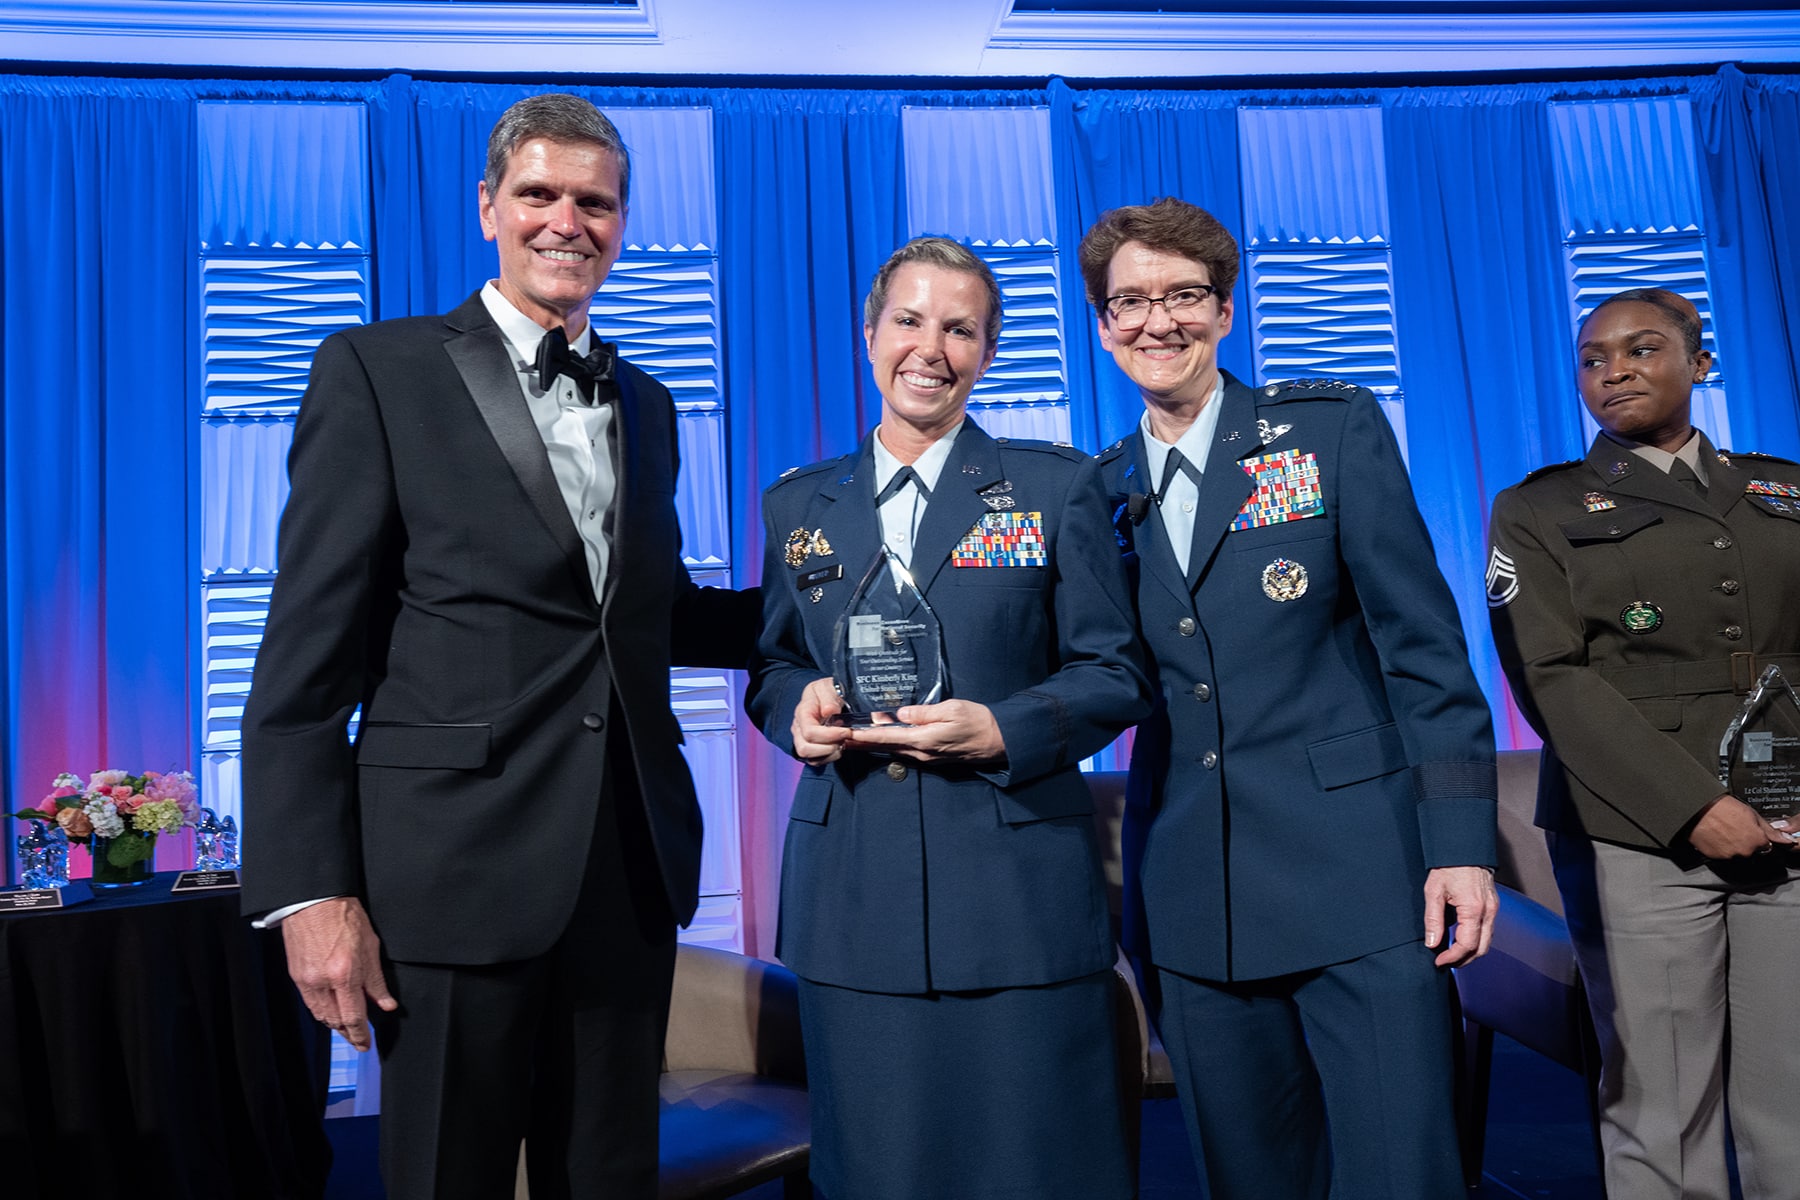 Special guest Lt. Col. Shannon Walker, USAF, honored for her dedication to the mission of USTRANSCOM.